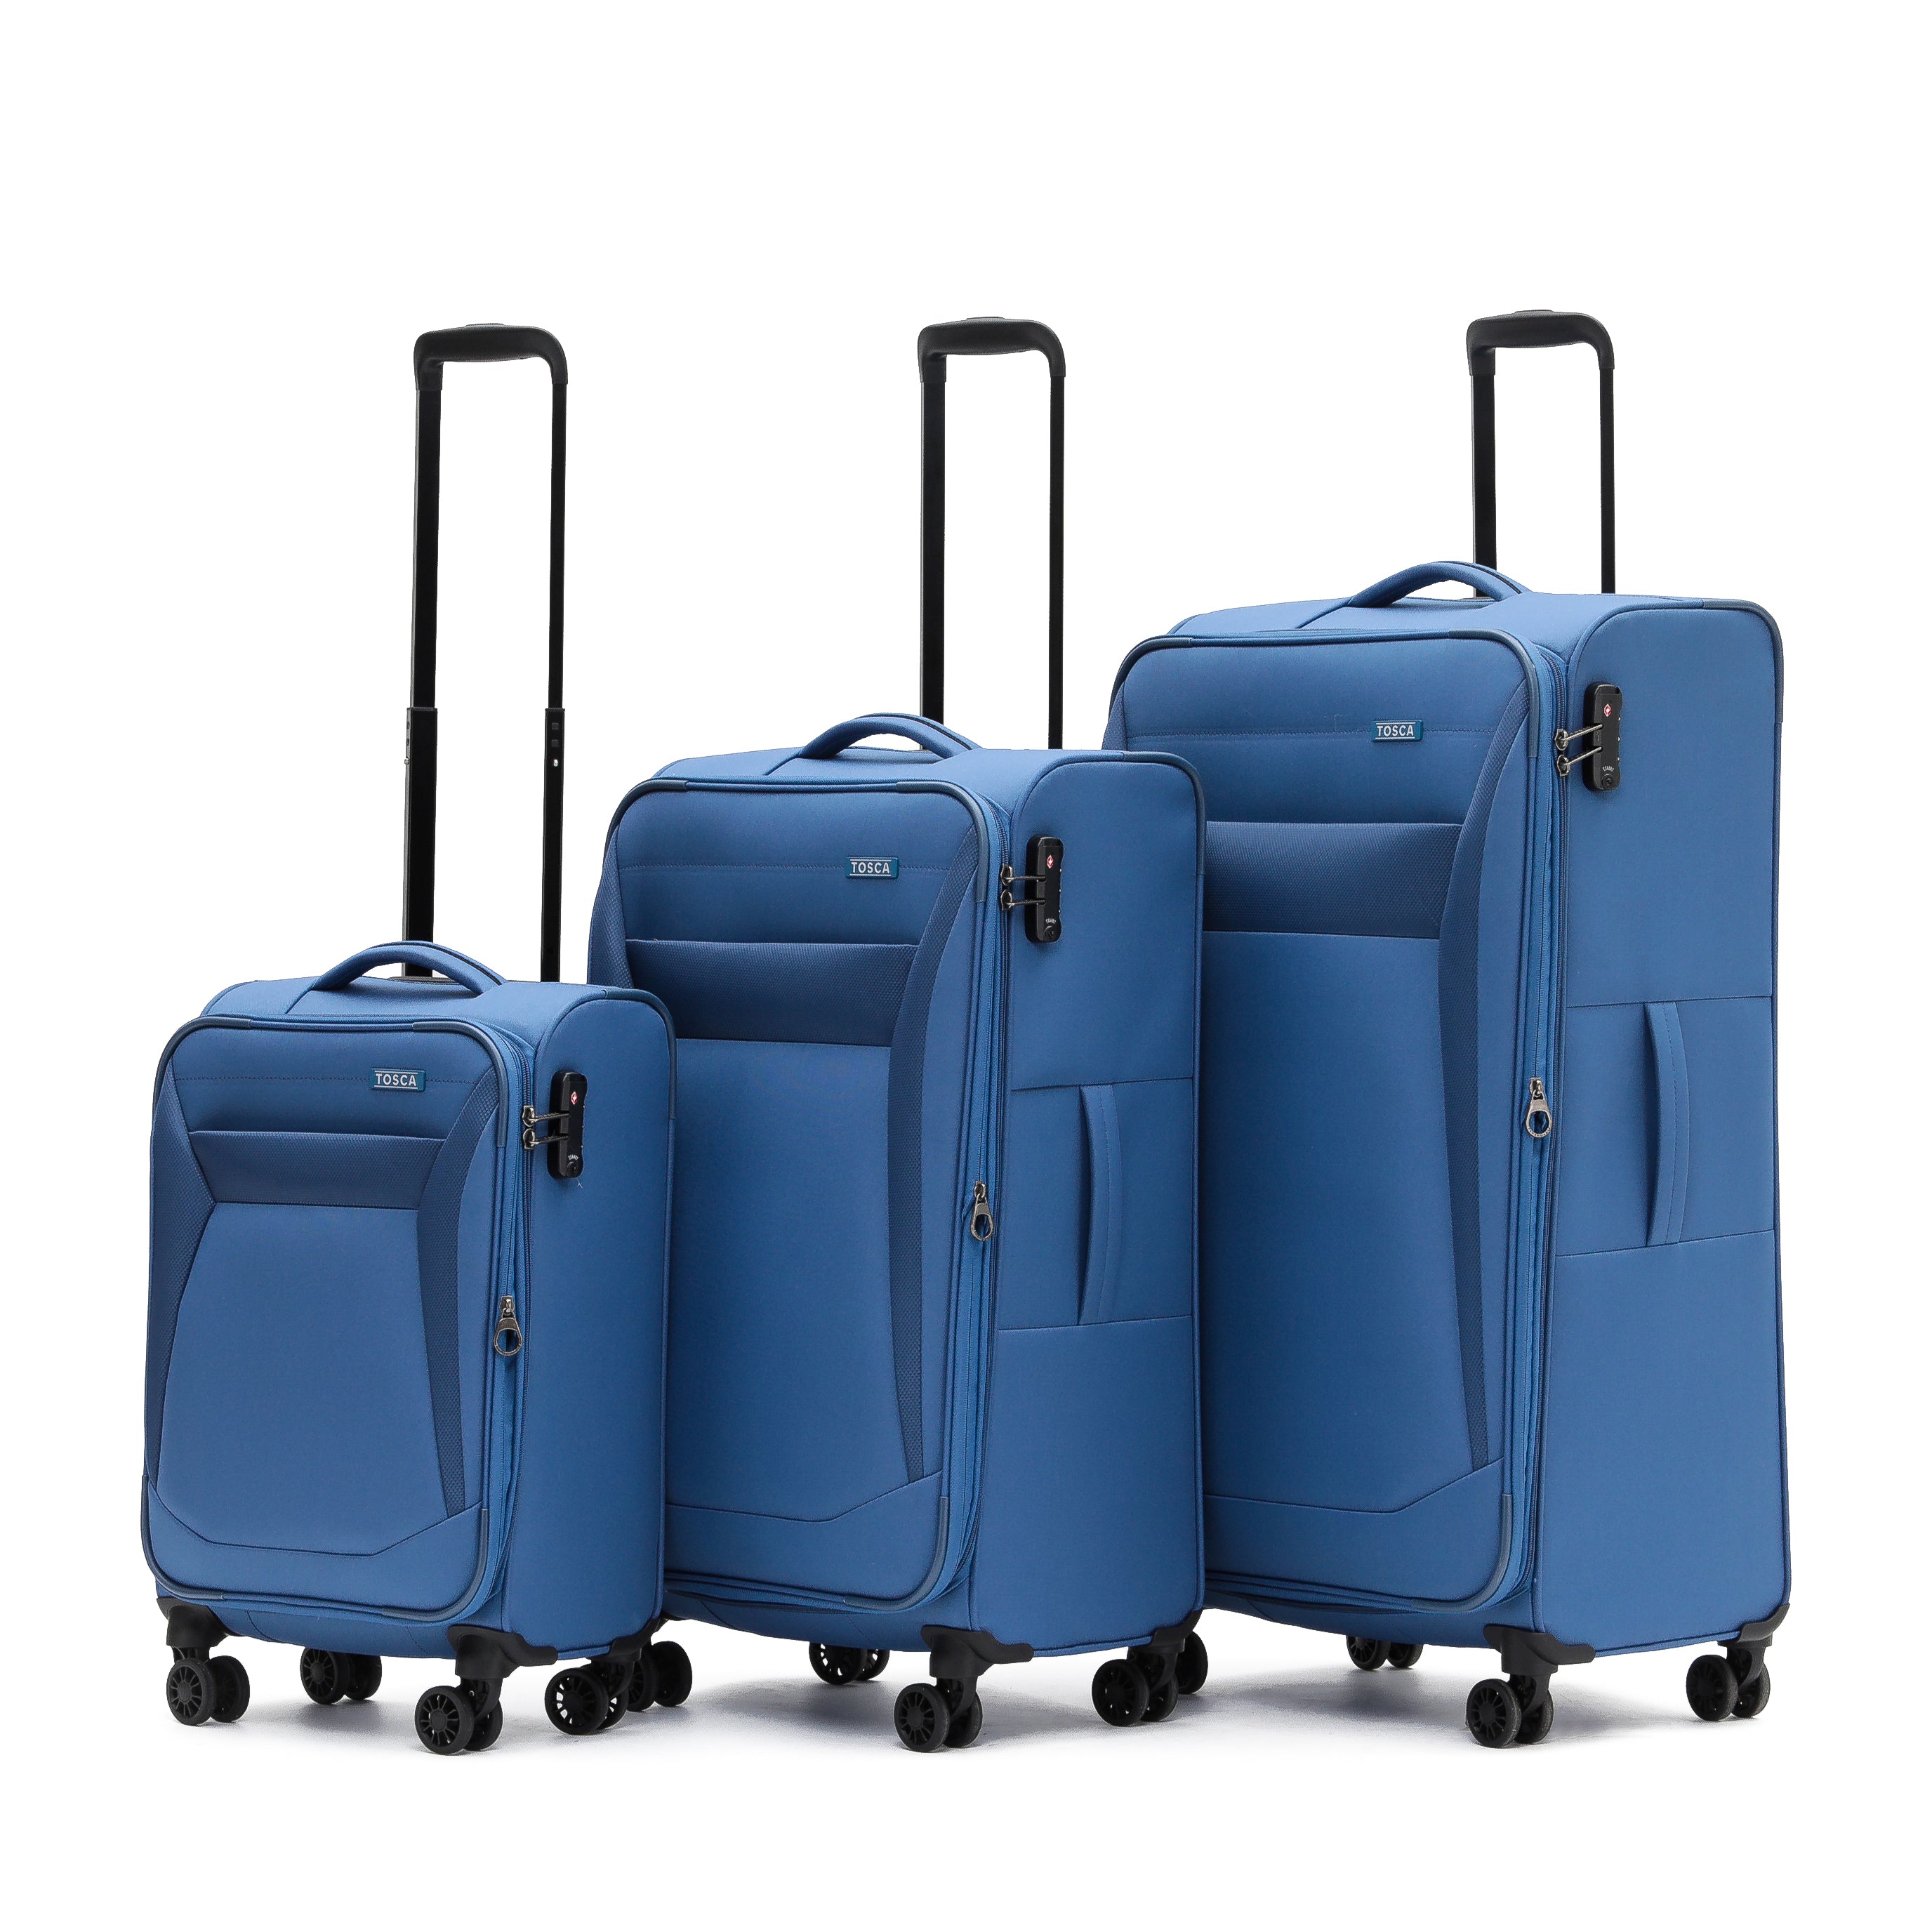 Tosca - Aviator 2.0 set of 3 suitcases (L-M-S) - Blue